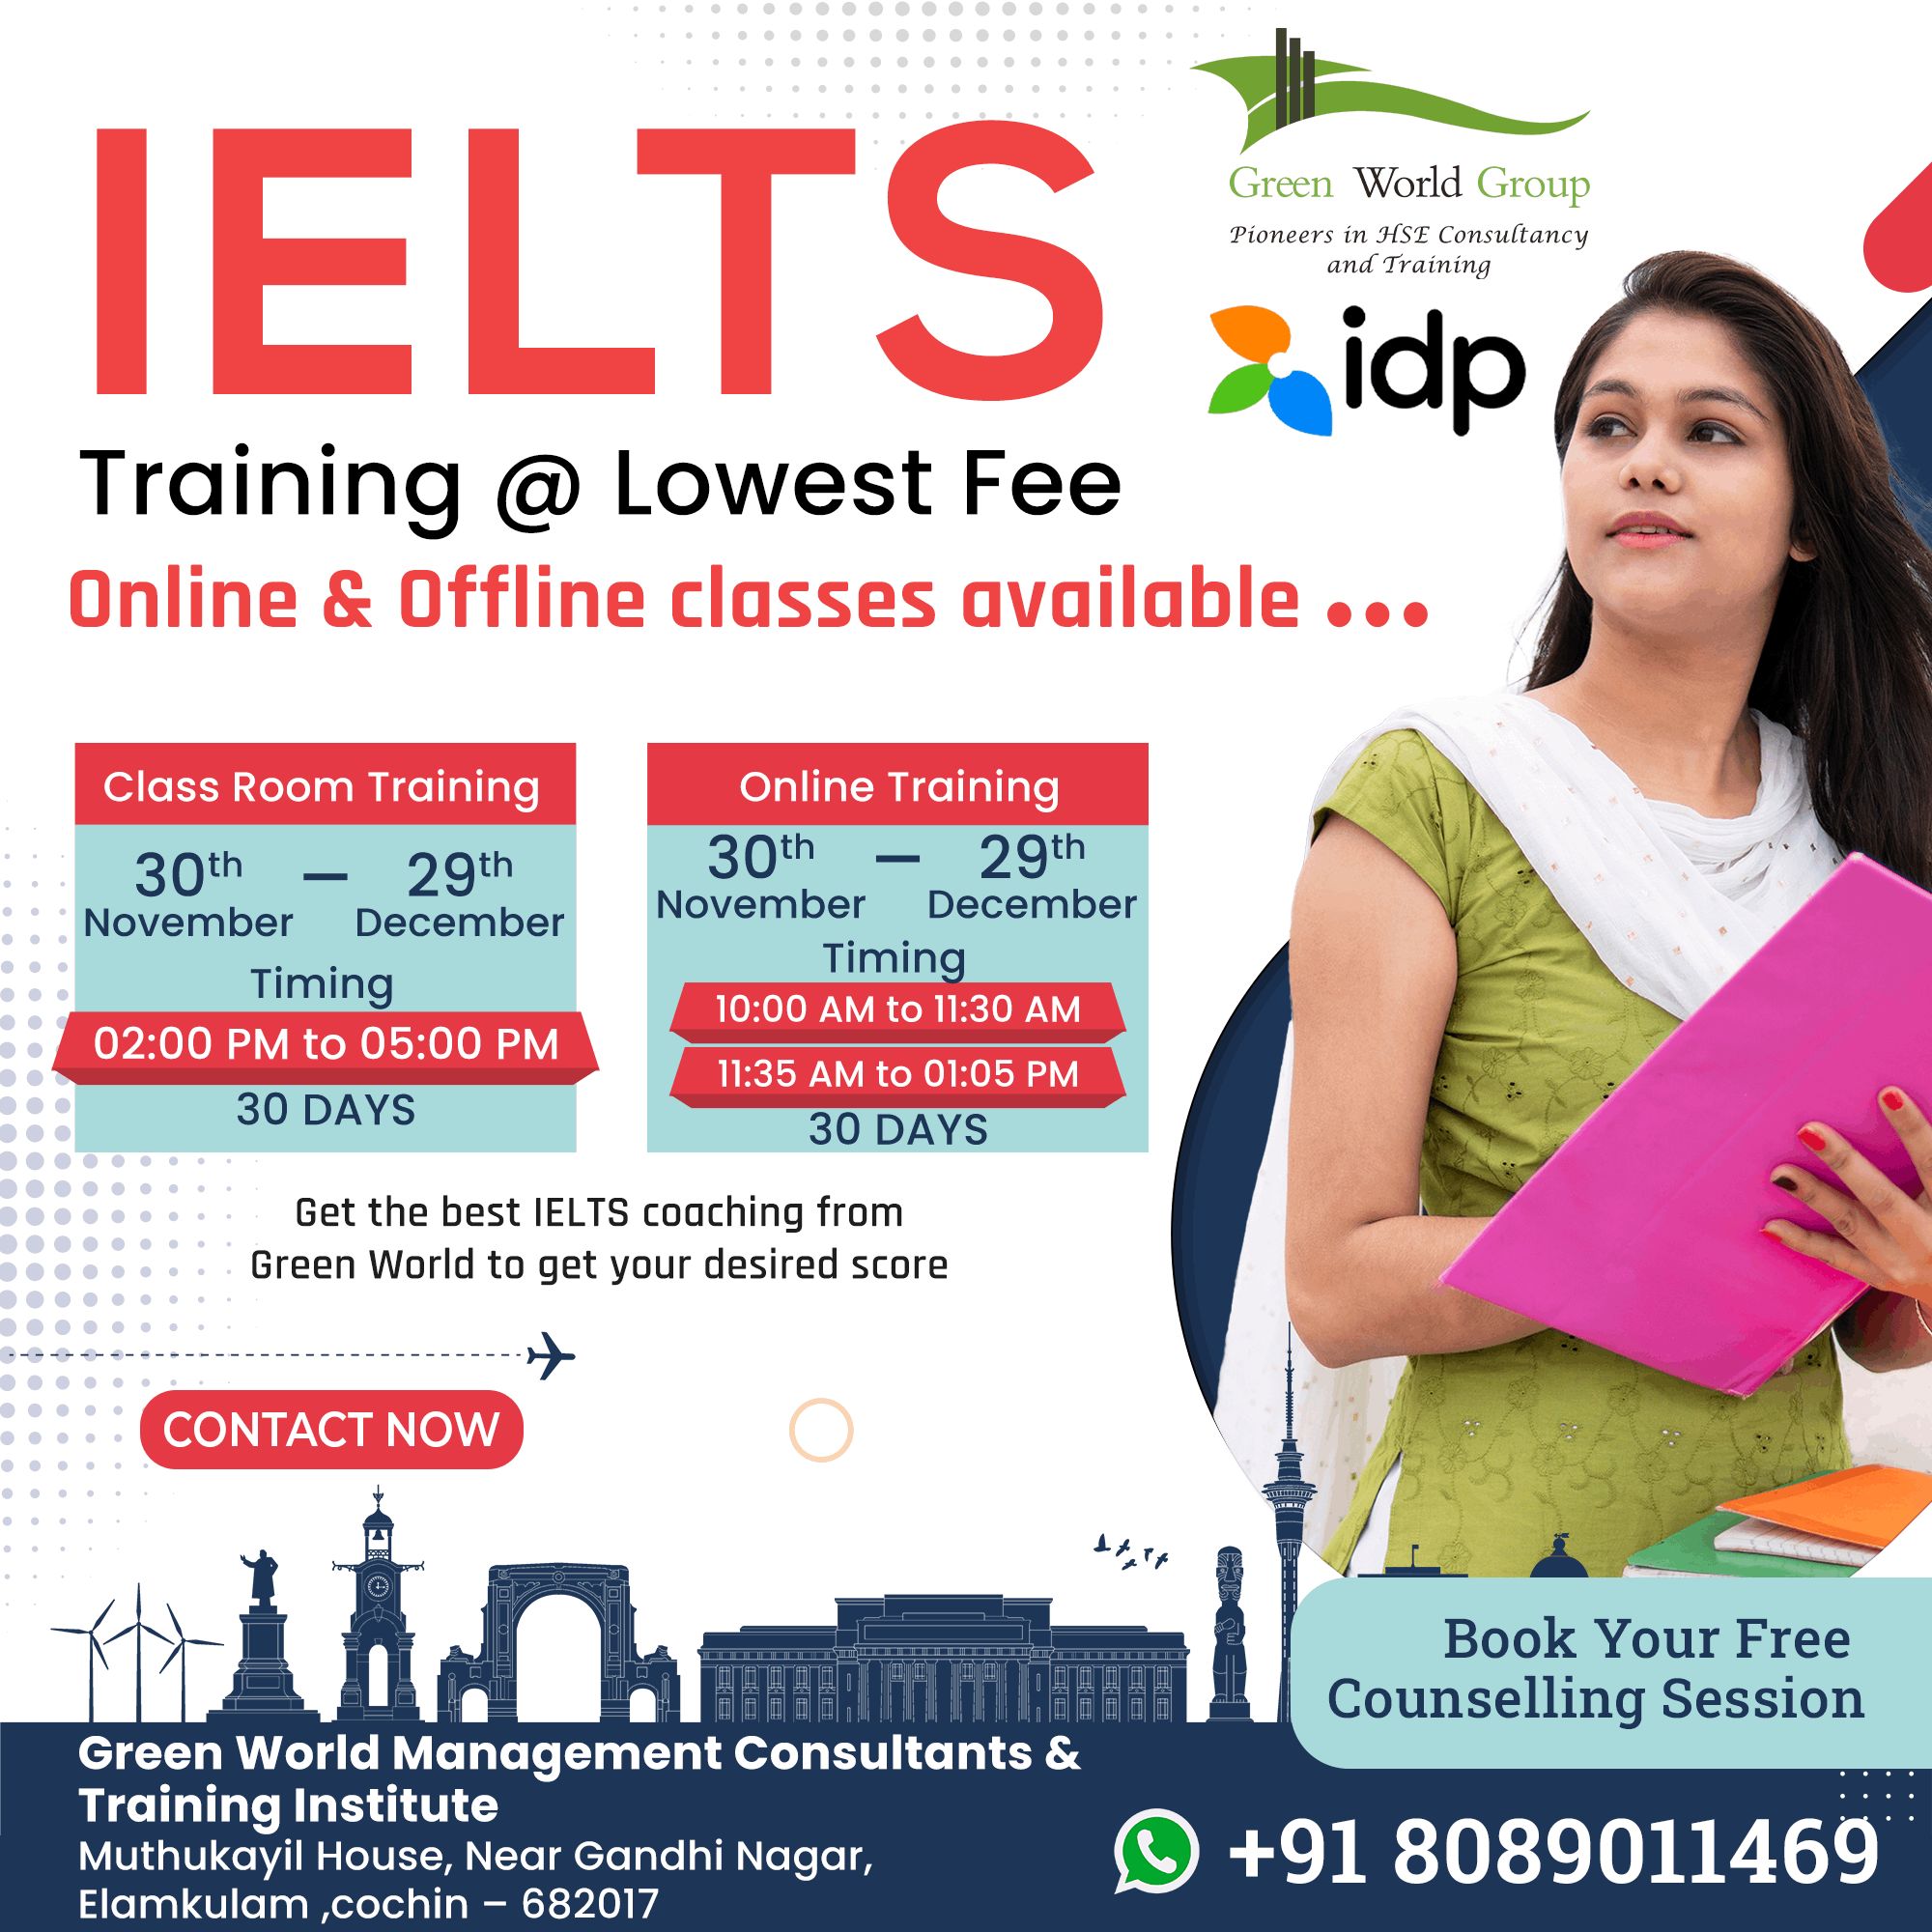 Crack Your IELTS With High Score!!